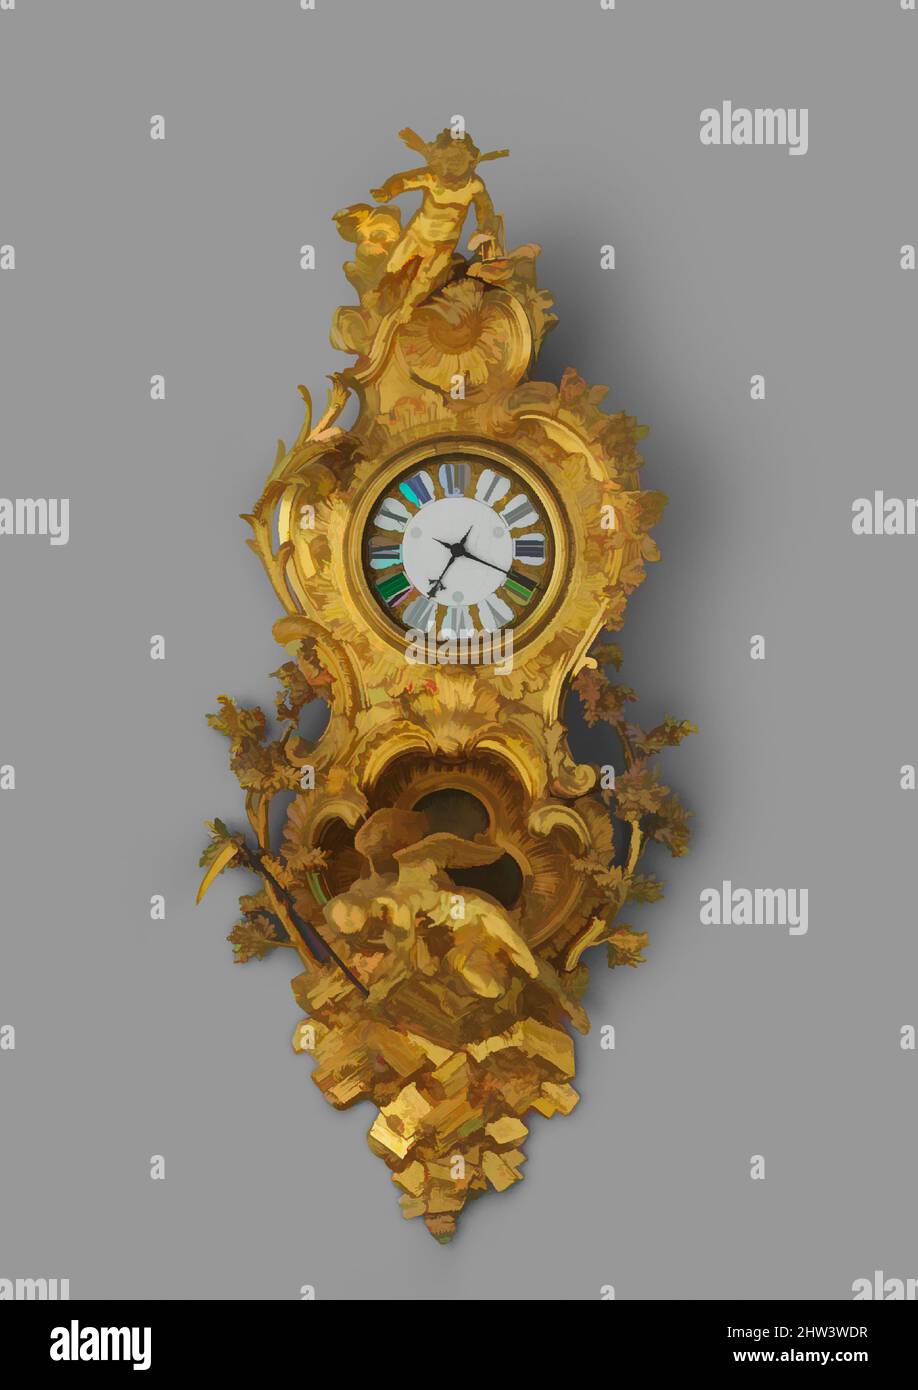 Art inspired by Wall clock (pendule en cartel), Clock maker: Jean Godde l'aîné (French, ca. 1668–1748/49), Case maker: Charles Cressent (French, Amiens 1685–1768 Paris), ca. 1740–45, French, Paris, Case: gilded bronze, oak, and tortoiseshell on brass marquetry on oak; Dial: white, Classic works modernized by Artotop with a splash of modernity. Shapes, color and value, eye-catching visual impact on art. Emotions through freedom of artworks in a contemporary way. A timeless message pursuing a wildly creative new direction. Artists turning to the digital medium and creating the Artotop NFT Stock Photo